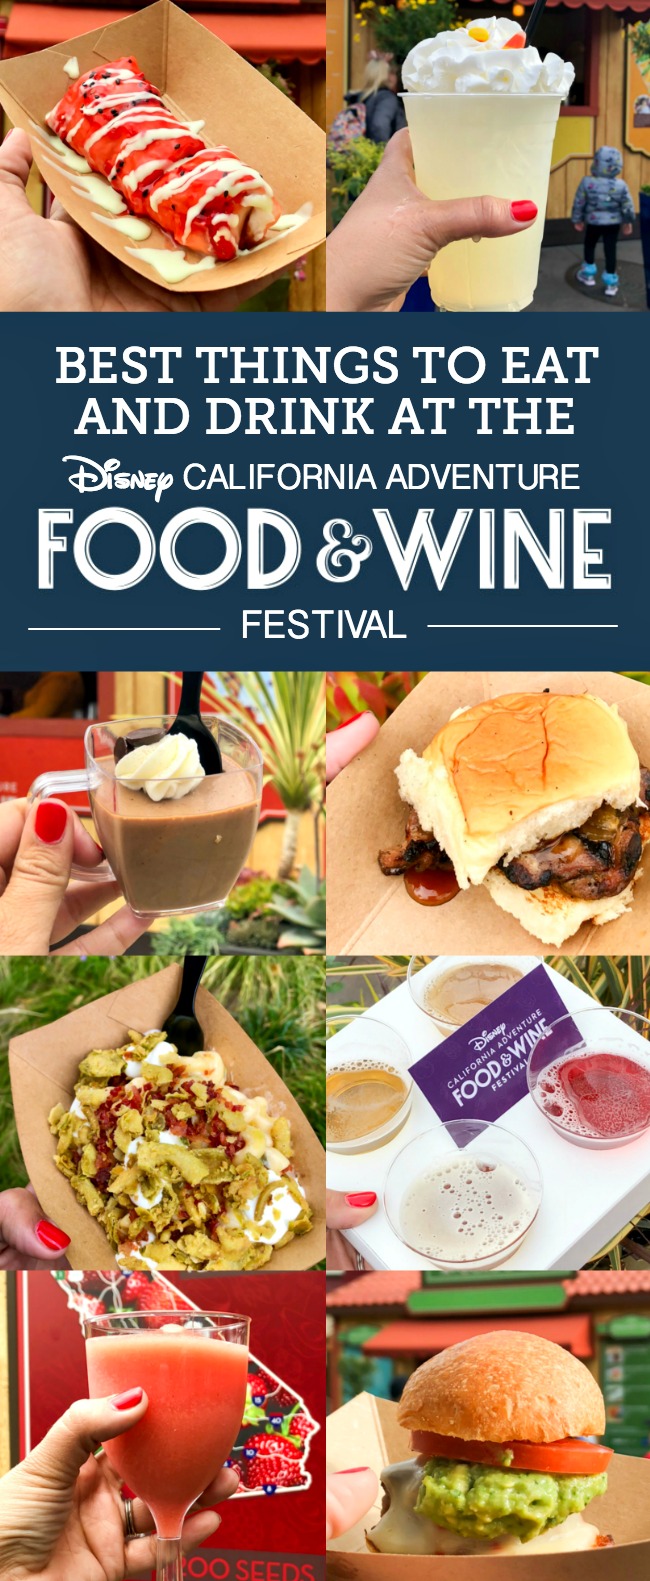 From Strawberry Frosé to Jalapeño Popper Mac & Cheese, there are so many great bites and brews to discover at the Disney California Adventure Food and Wine Festival! #DisneyCaliforniaFoodandWine #Disneyland